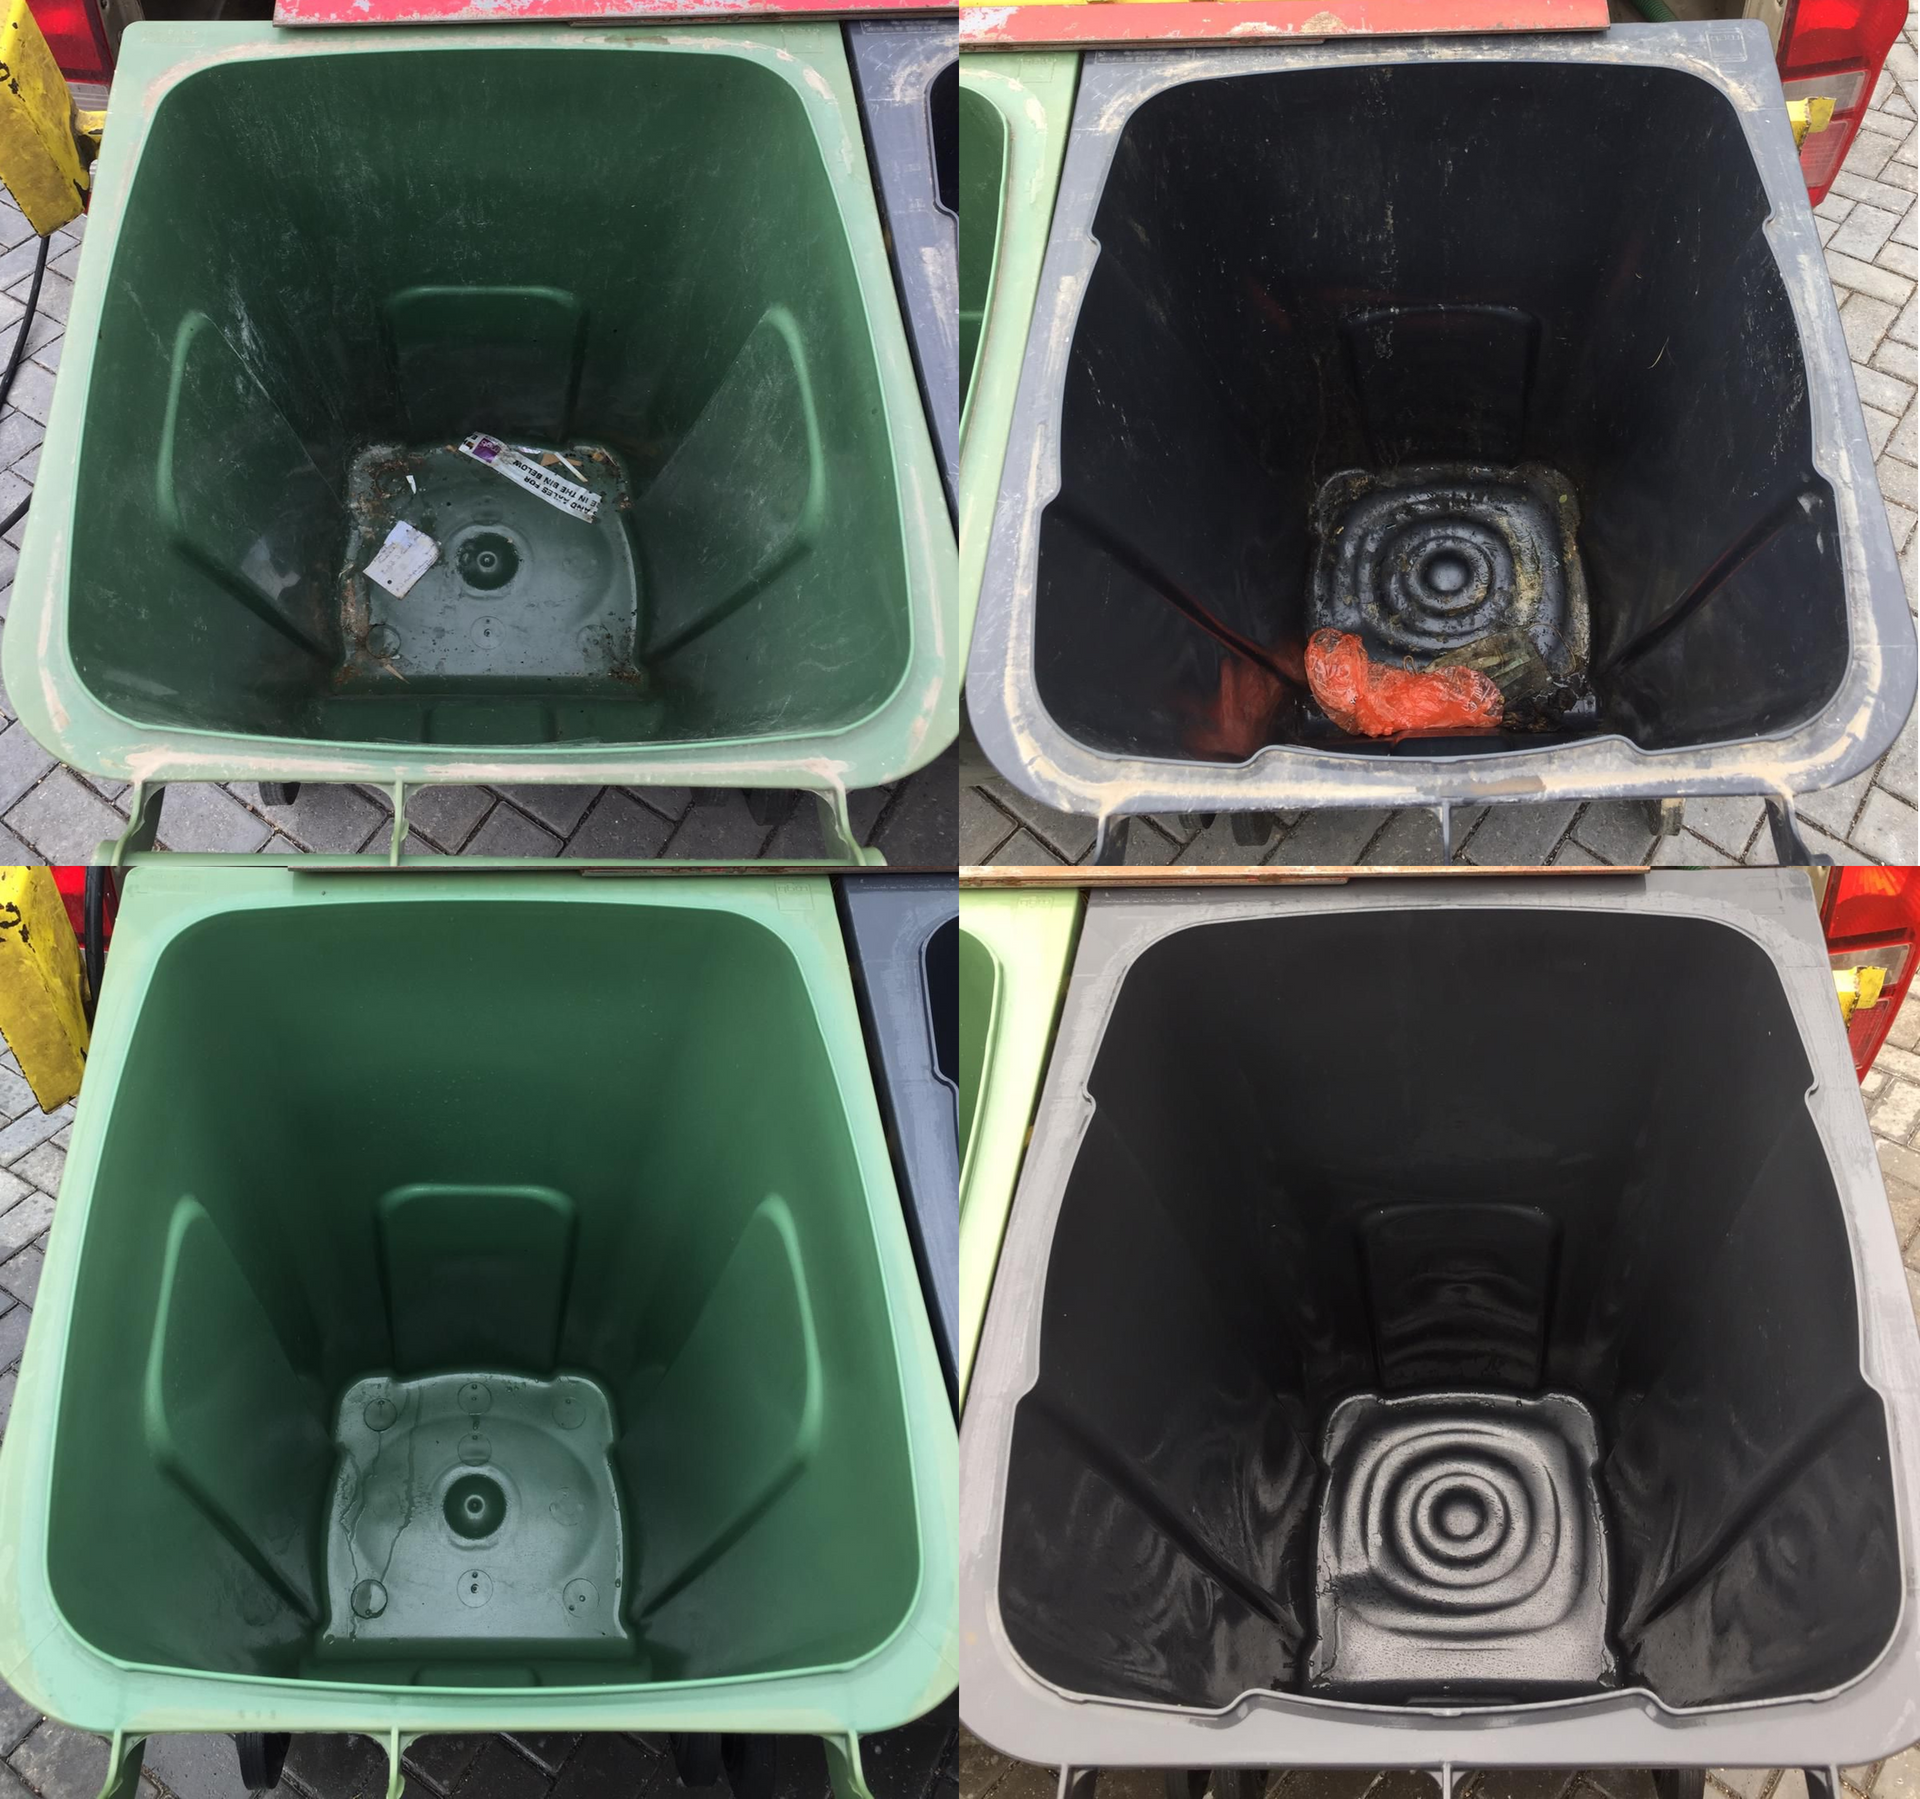 An image of green waste bin and black waste bin before cleaning and after cleaning.